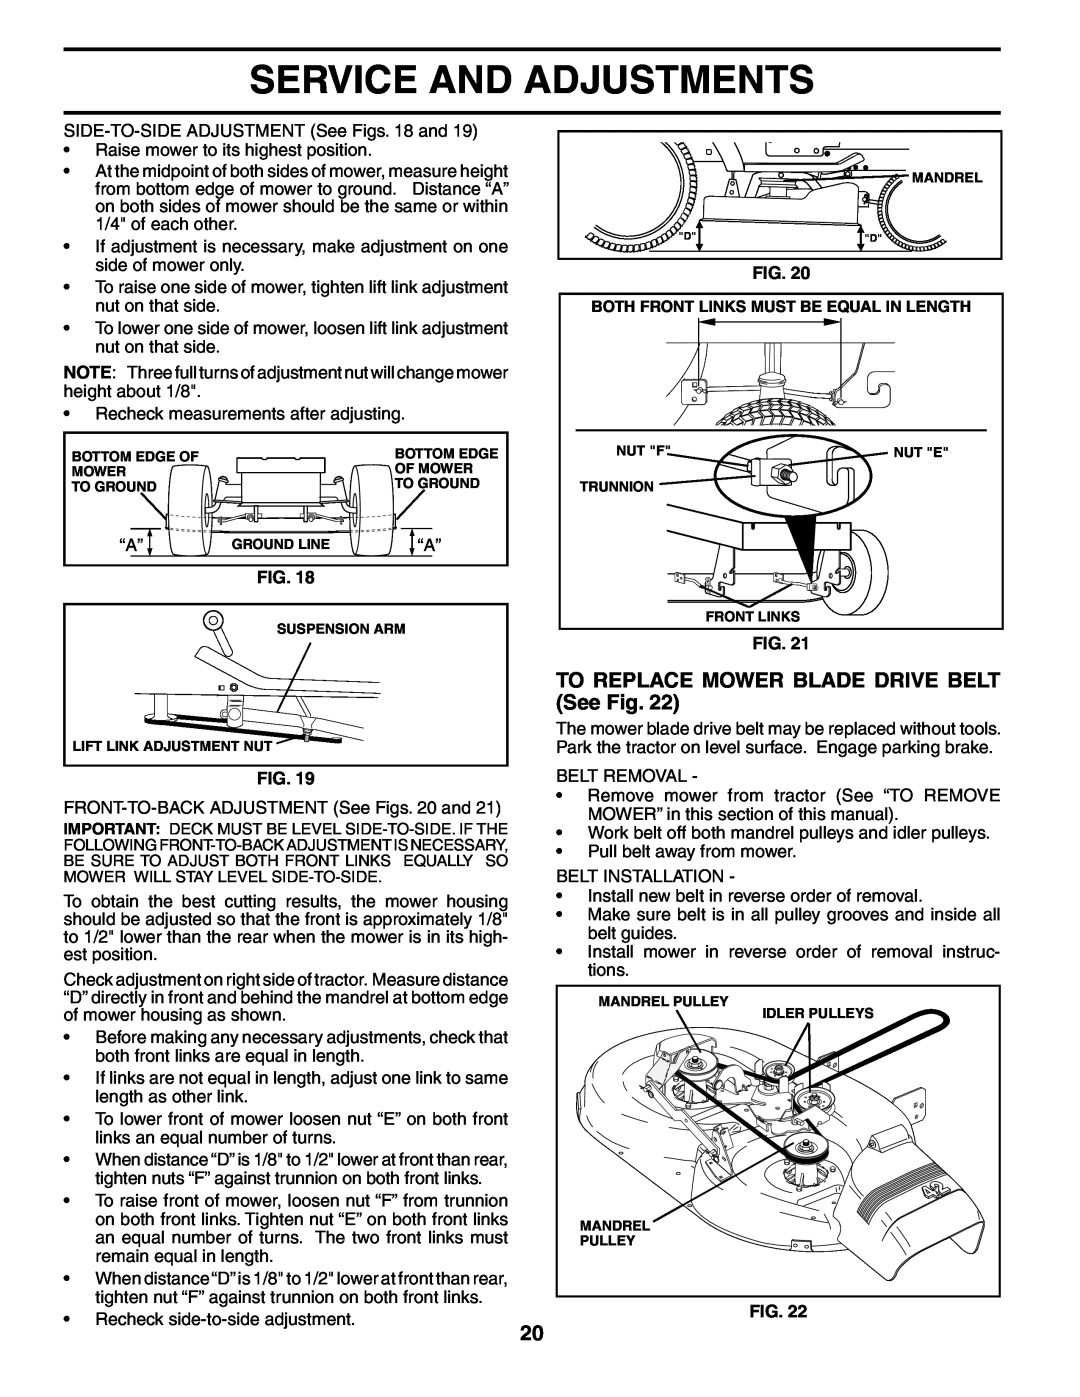 Poulan DB24H42YT manual TO REPLACE MOWER BLADE DRIVE BELT See Fig, Service And Adjustments 